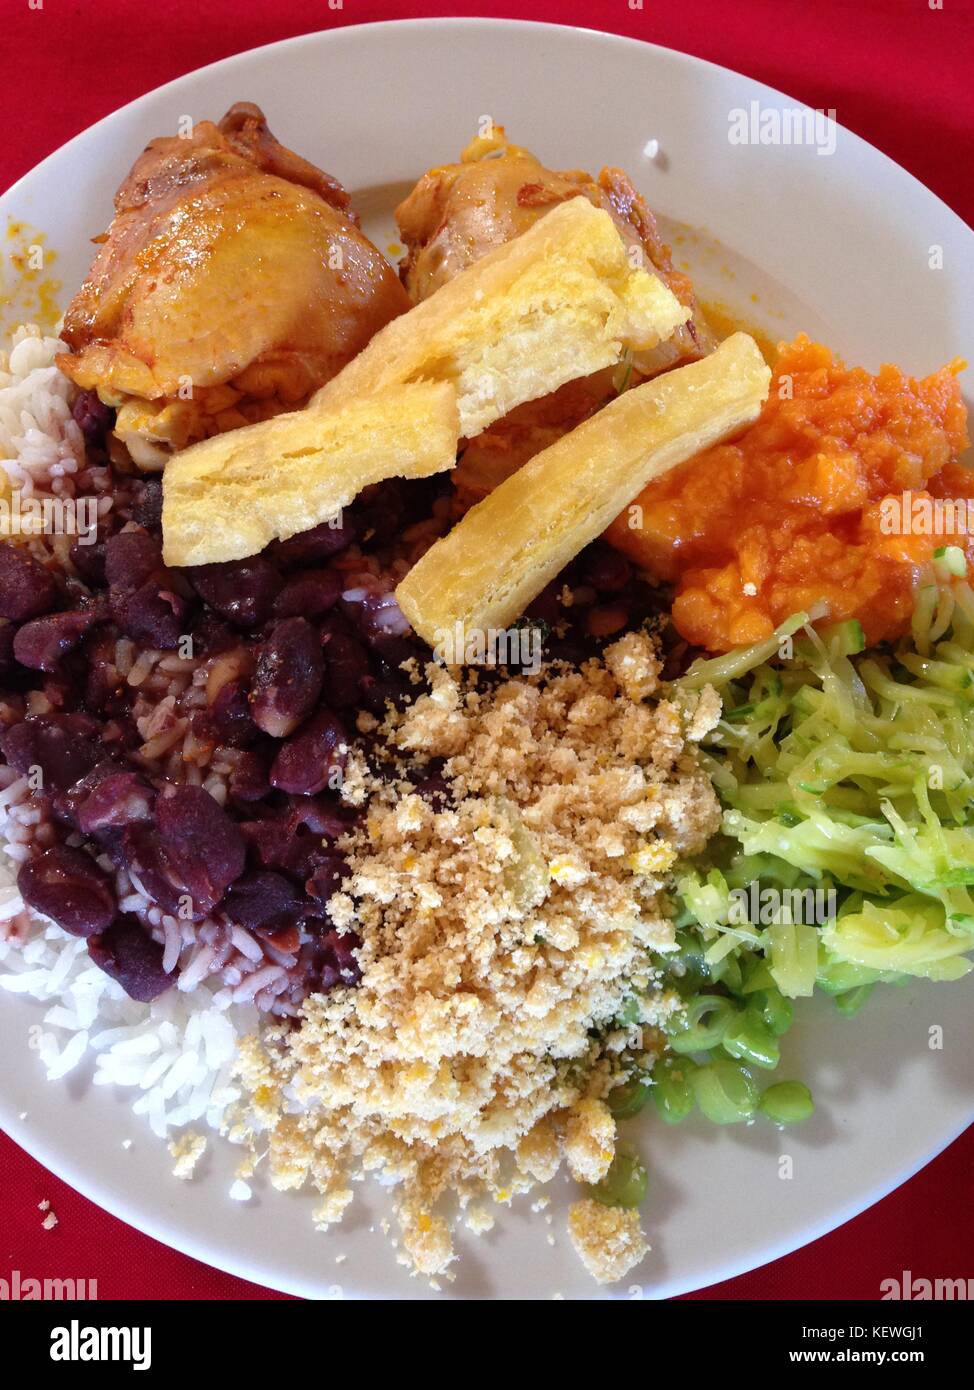 Colorful tradicional brazilian plate with rice, beans, vegetables, chicken, cassava and farofa Stock Photo